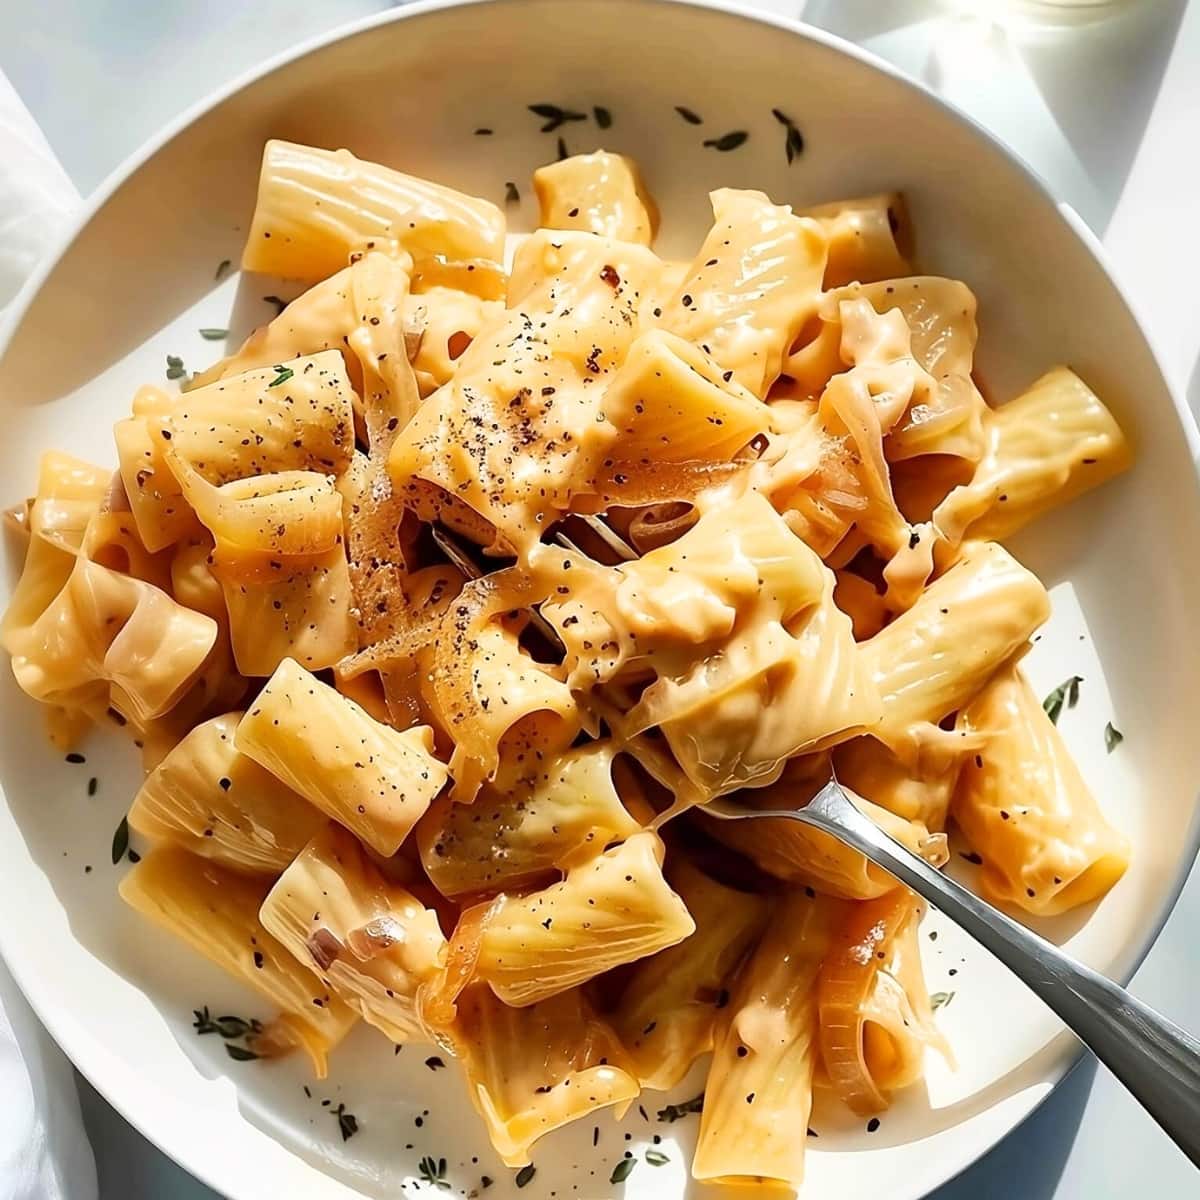 
A serving of creamy French onion pasta in a plate.